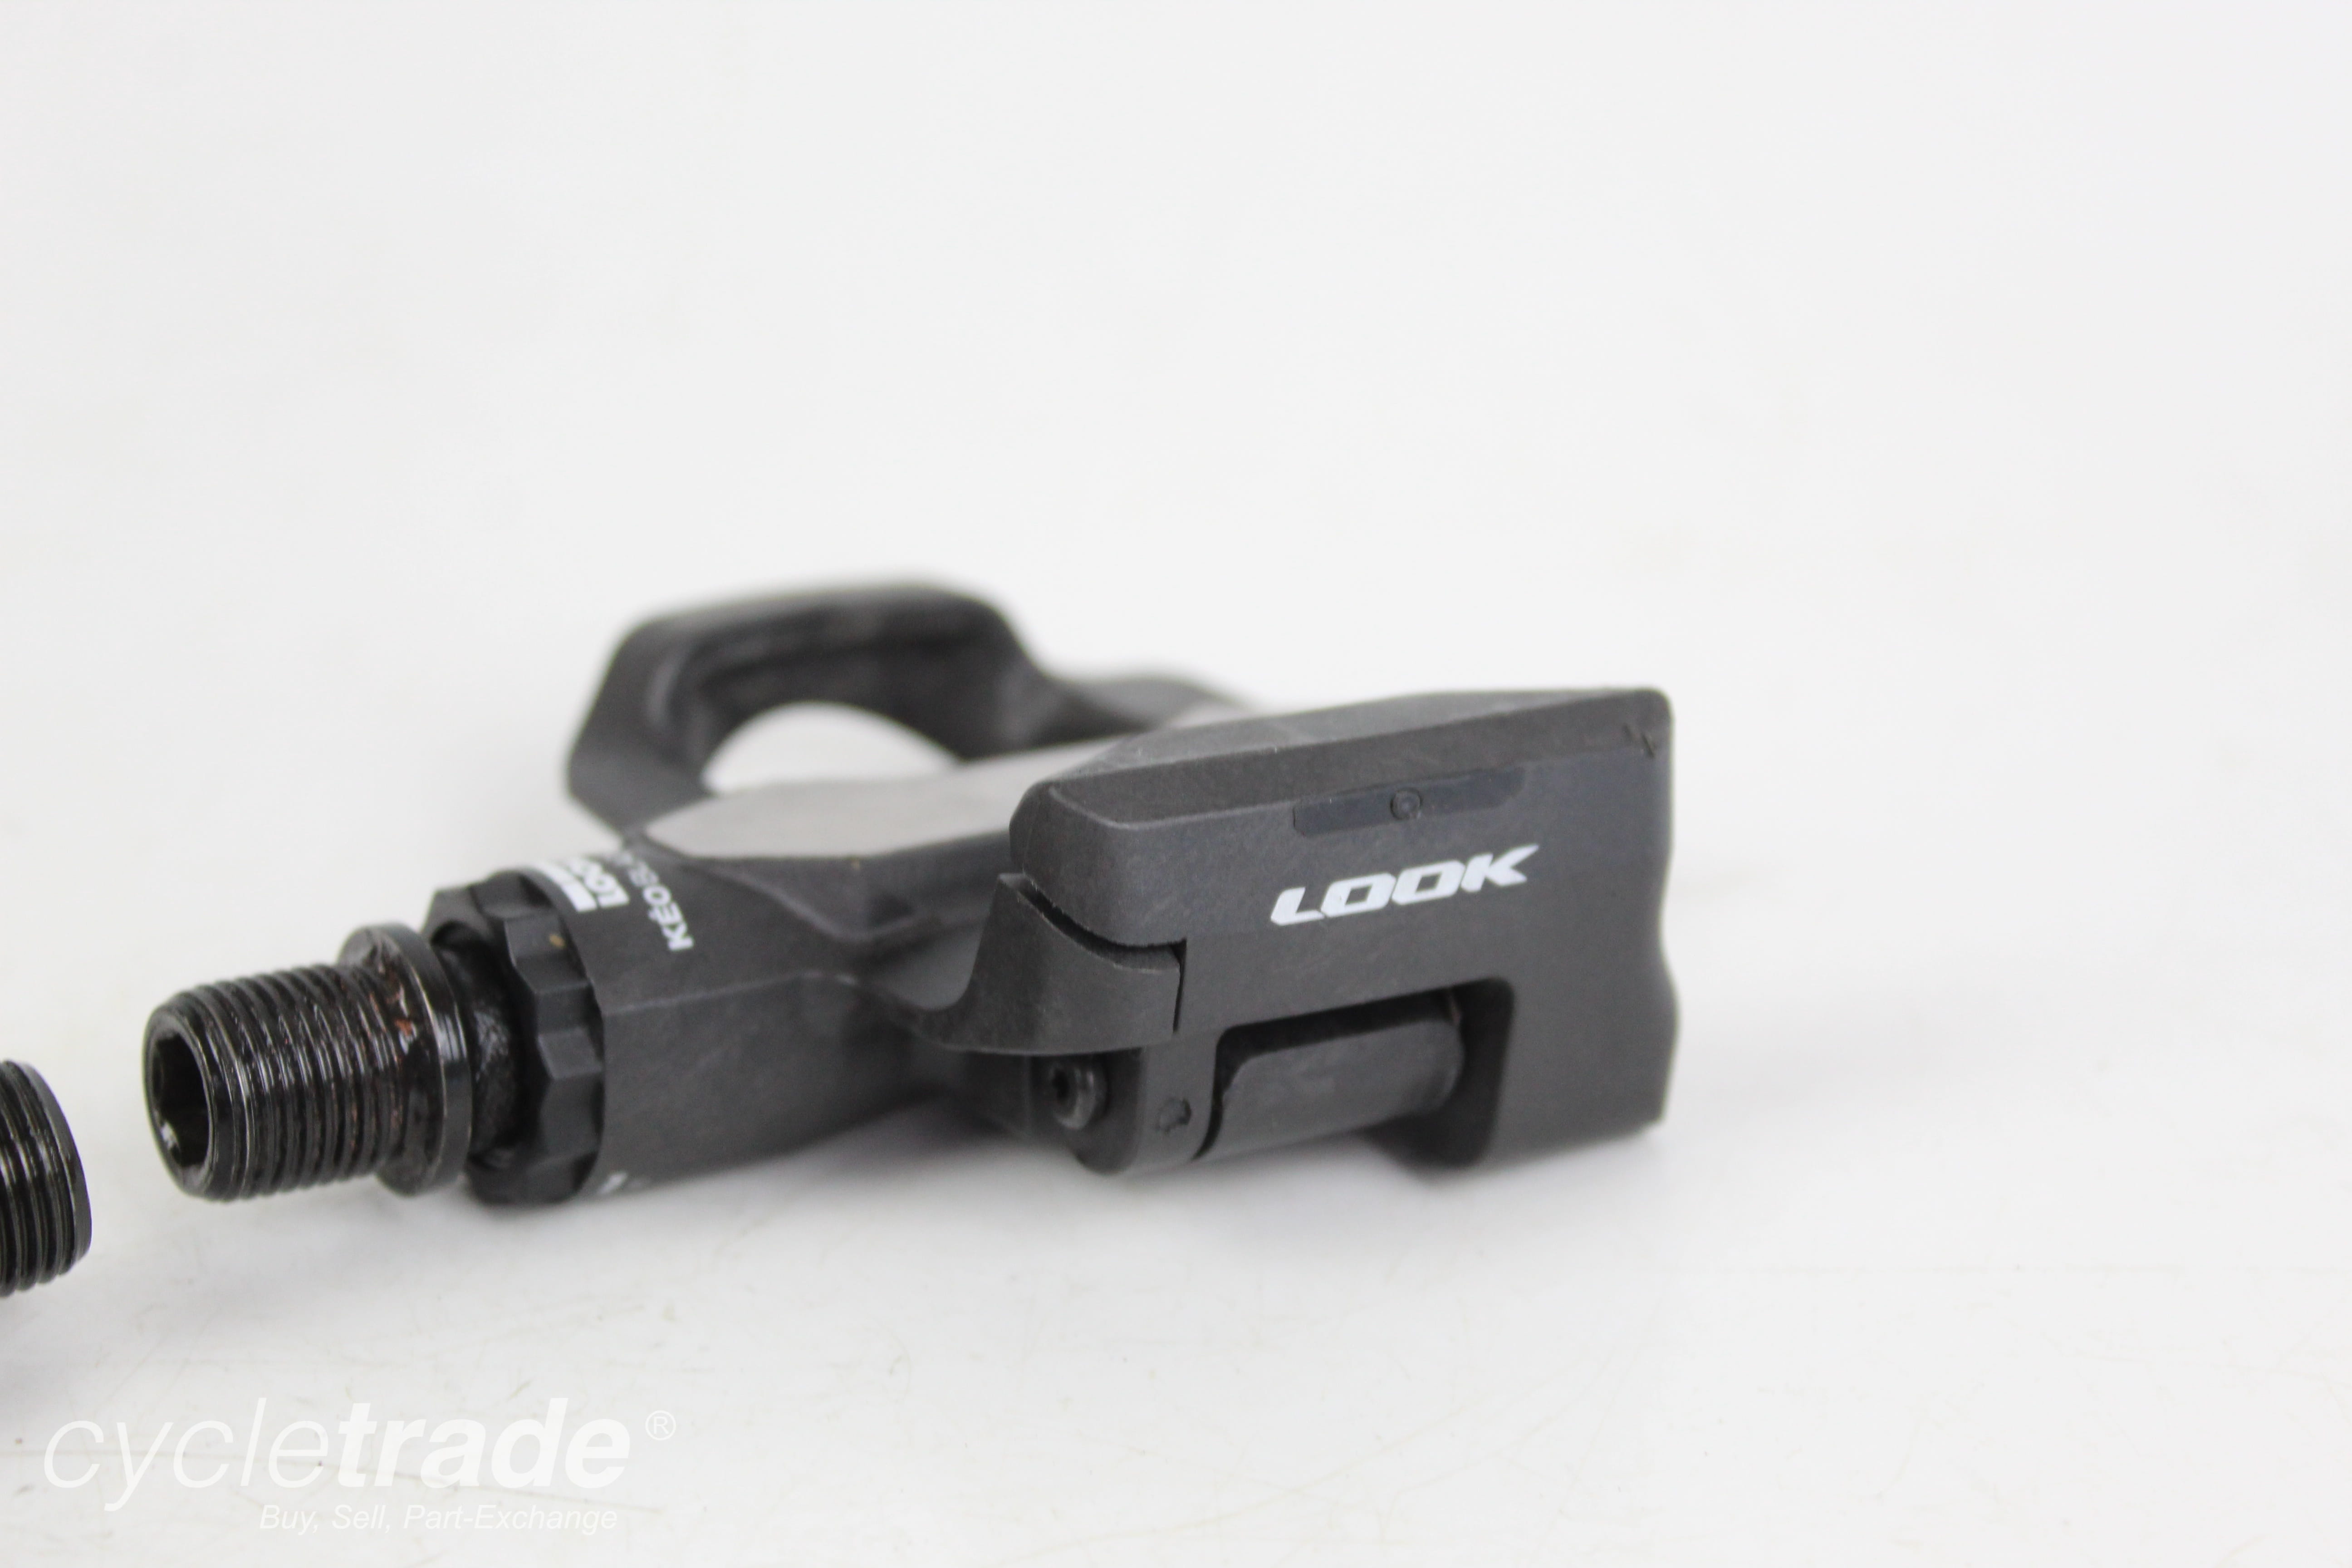 Clipless Pedal- Look Keo Blade Compatible - Grade C+